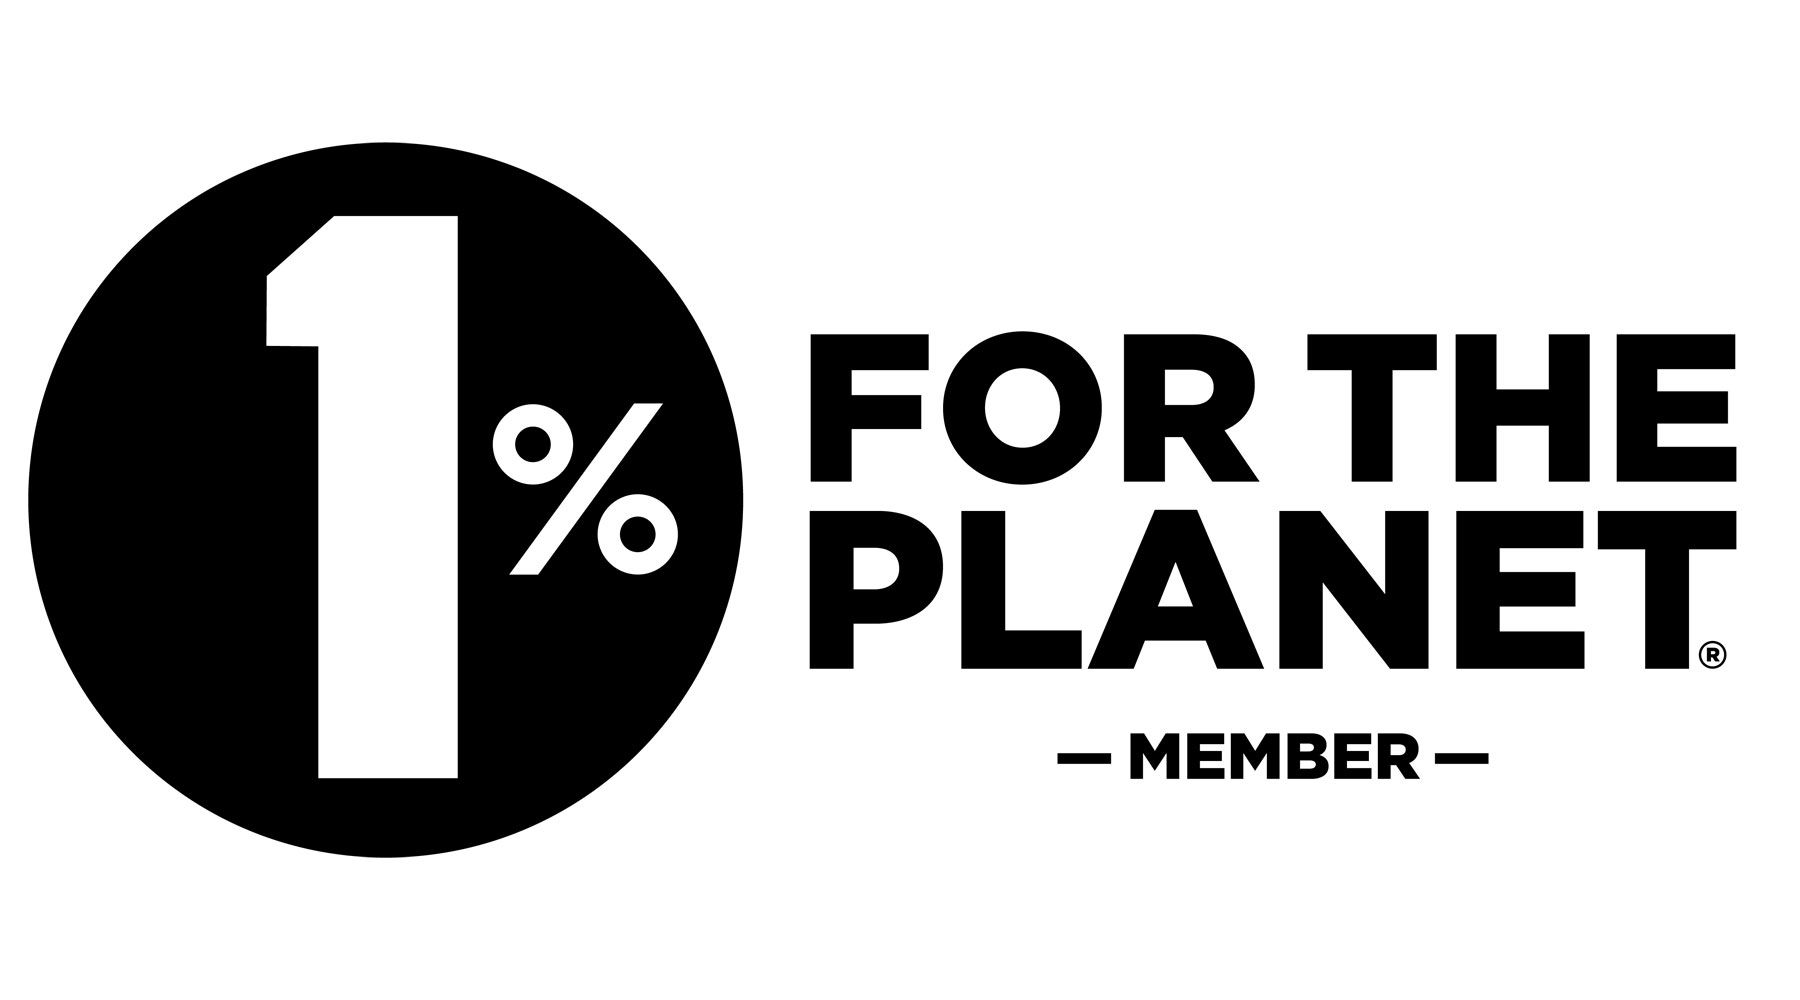 One Percent For The Planet logo